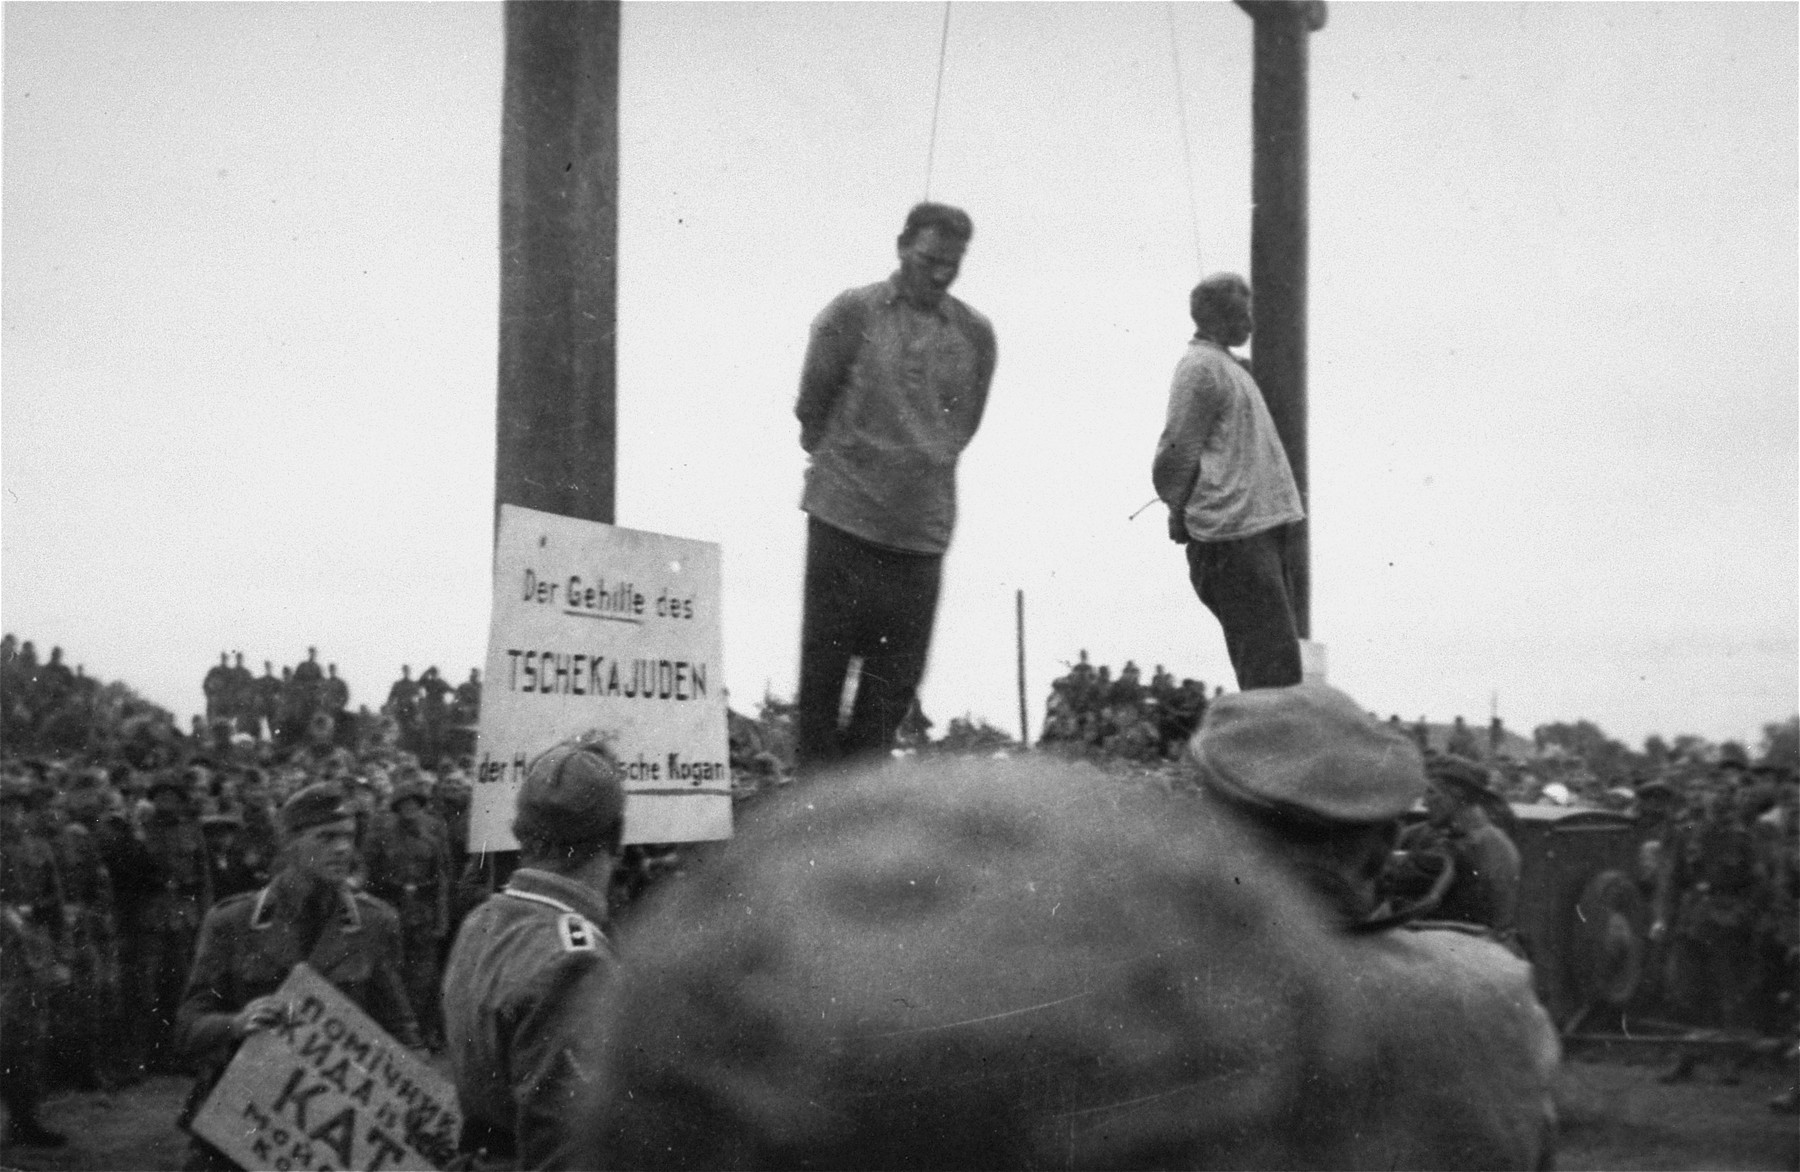 The hanging of Mosche Kogan (left) and Wolf Kieper on the market square in Zhitomir.  

An SD officer is tacking up signs in Ukrainian and German that read "The assistant of the Cheka (Soviet secret police) Jew, the hangman Mosche Kogan."